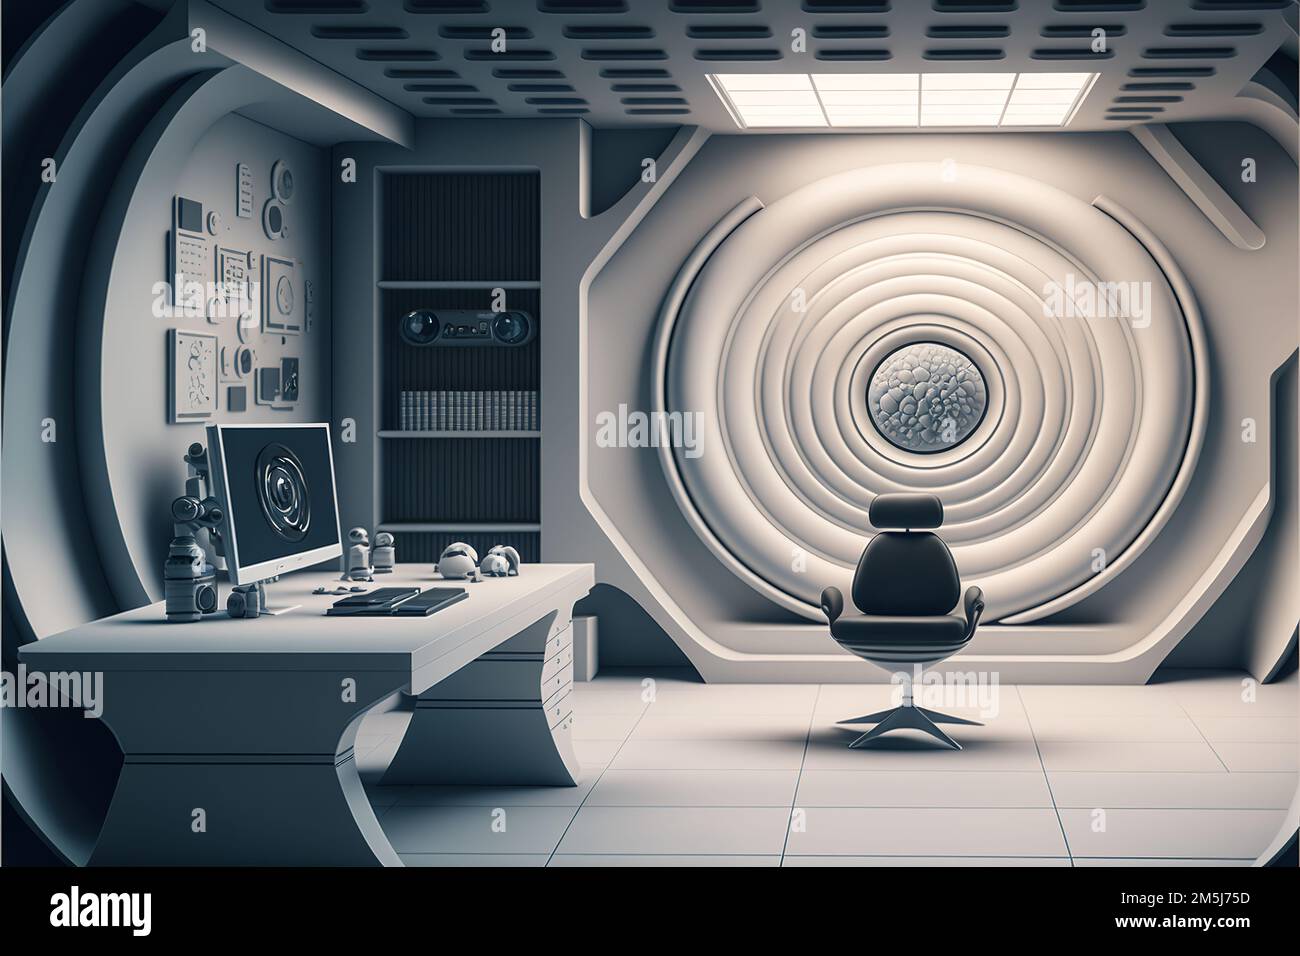 Futuristic Designer Office with Sleek Architecture and Modern Design in Ultra High Resolution, Art, Architecture Stock Photo